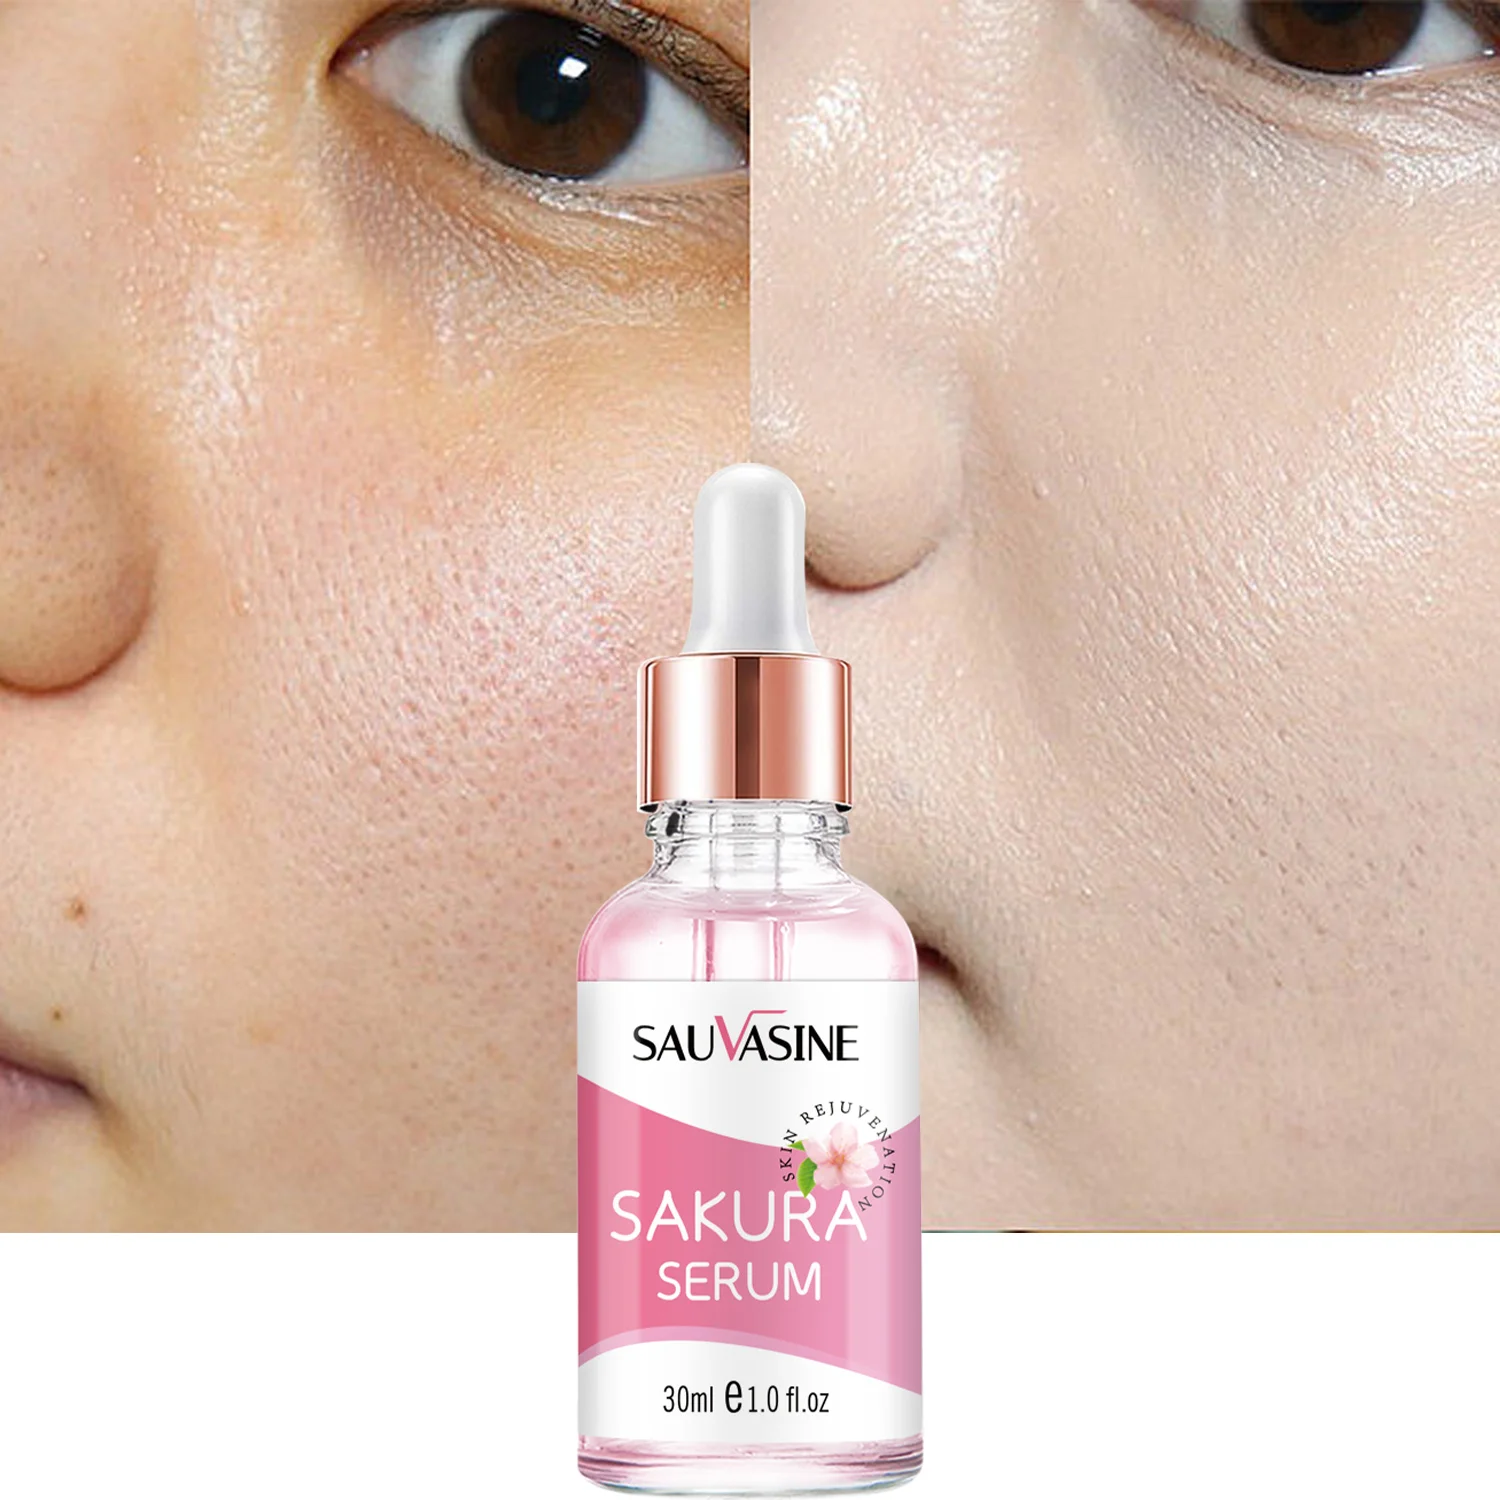 

30ml Cherry Blossom Serum Face Brightening Hydrating Soothing Skin Care Anti-Aging, Soothing Sensitive Skin